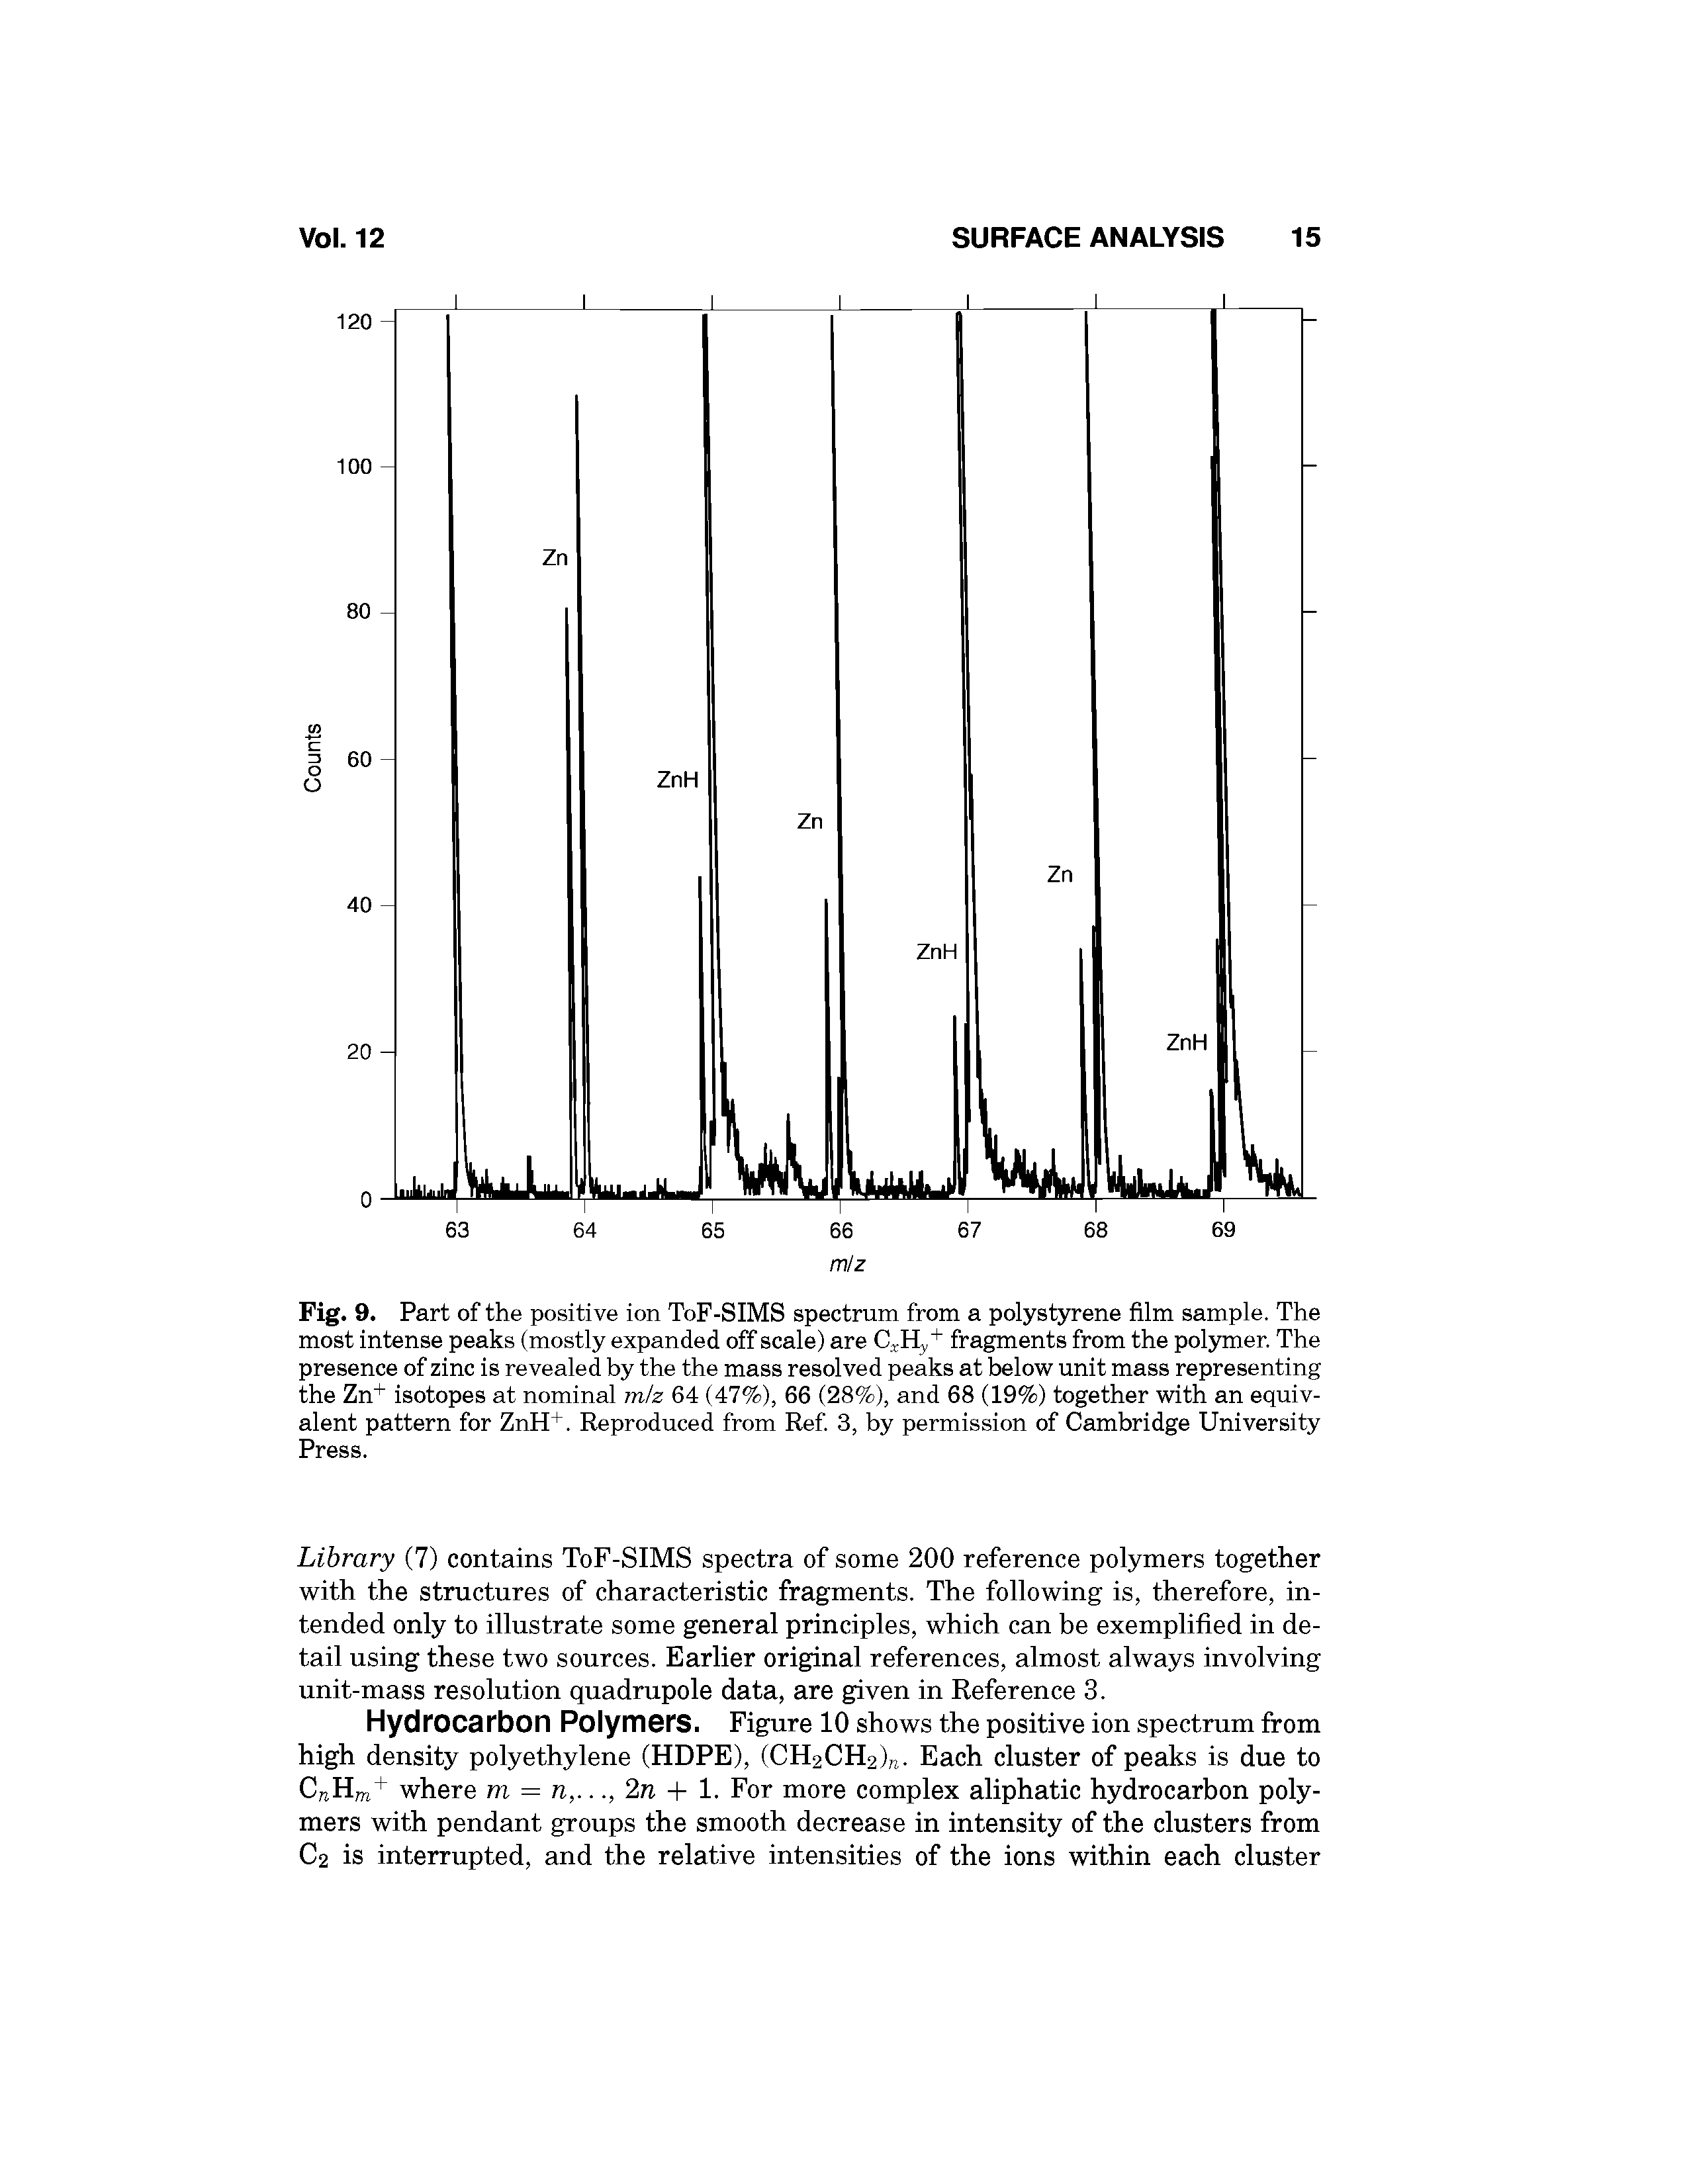 Fig. 9. Part of the positive ion ToF-SIMS spectrum from a polystyrene film sample. The most intense peaks (mostly expanded off scale) are Cj Hy+ fragments from the polsmier. The presence of zinc is revealed by the the mass resolved peaks at below unit mass representing the Zn" " isotopes at nominal m/z 64 (47%), 66 (28%), and 68 (19%) together with an equivalent pattern for ZnH+. Reproduced from Ref 3, by permission of Cambridge University Press.